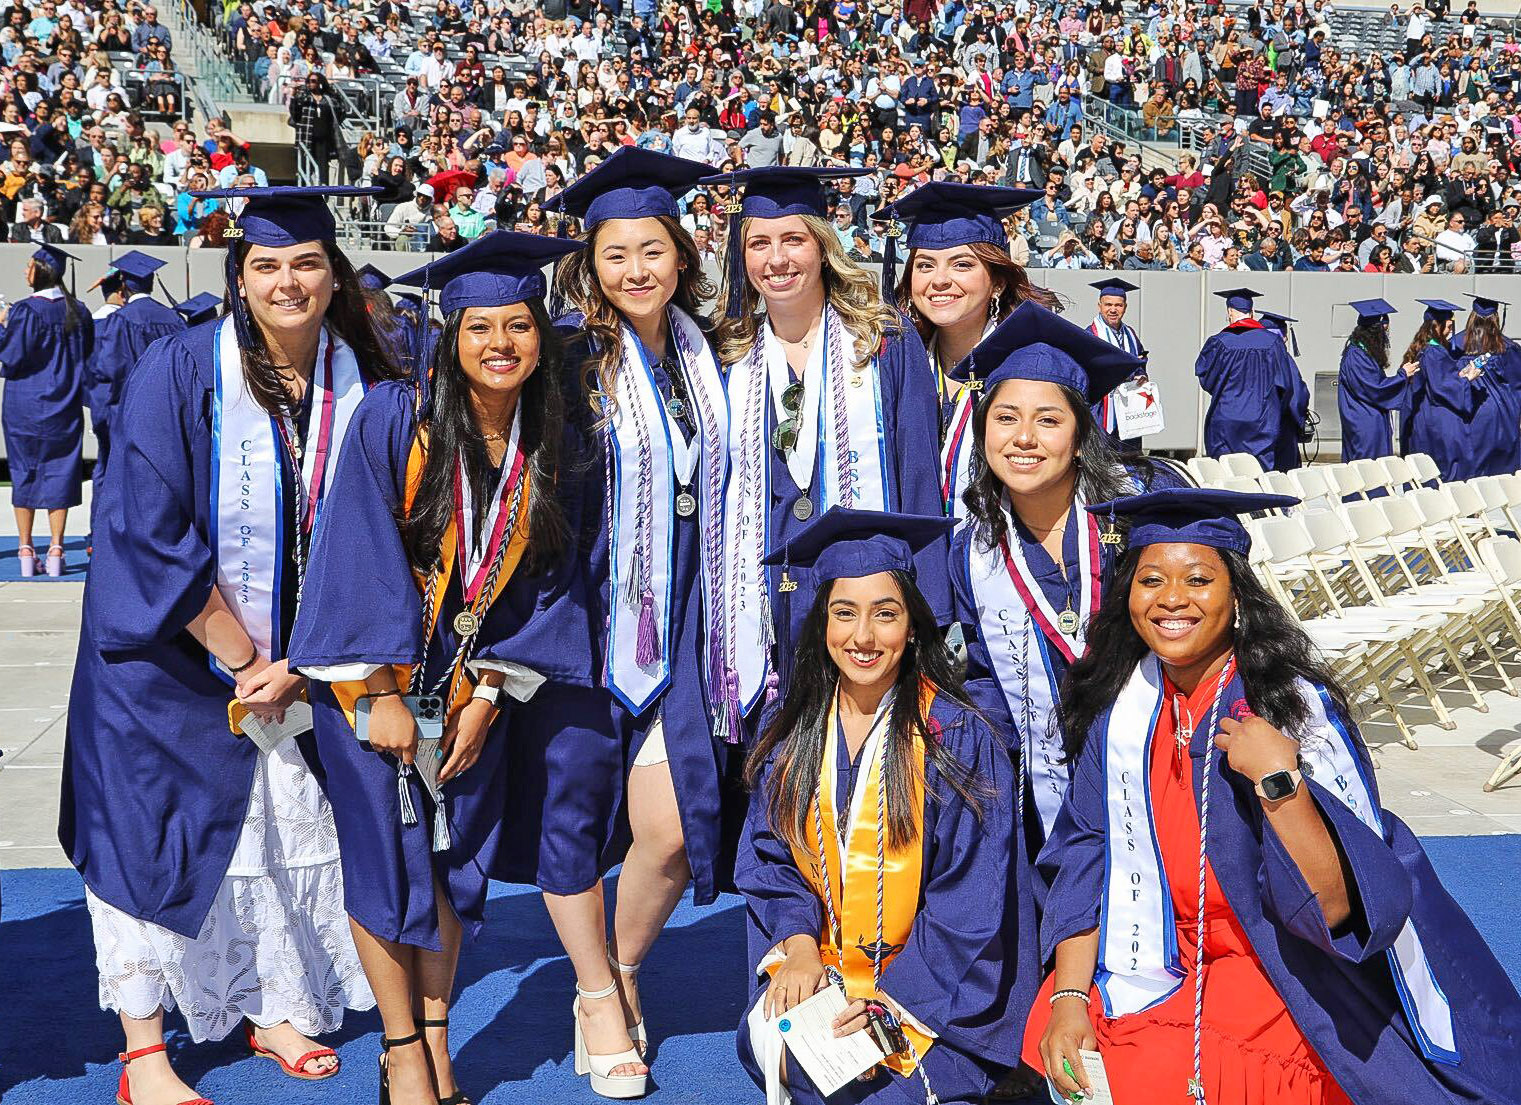 A group of female graduations, wearing caps, gowns and regalia, on the field at Commencement.